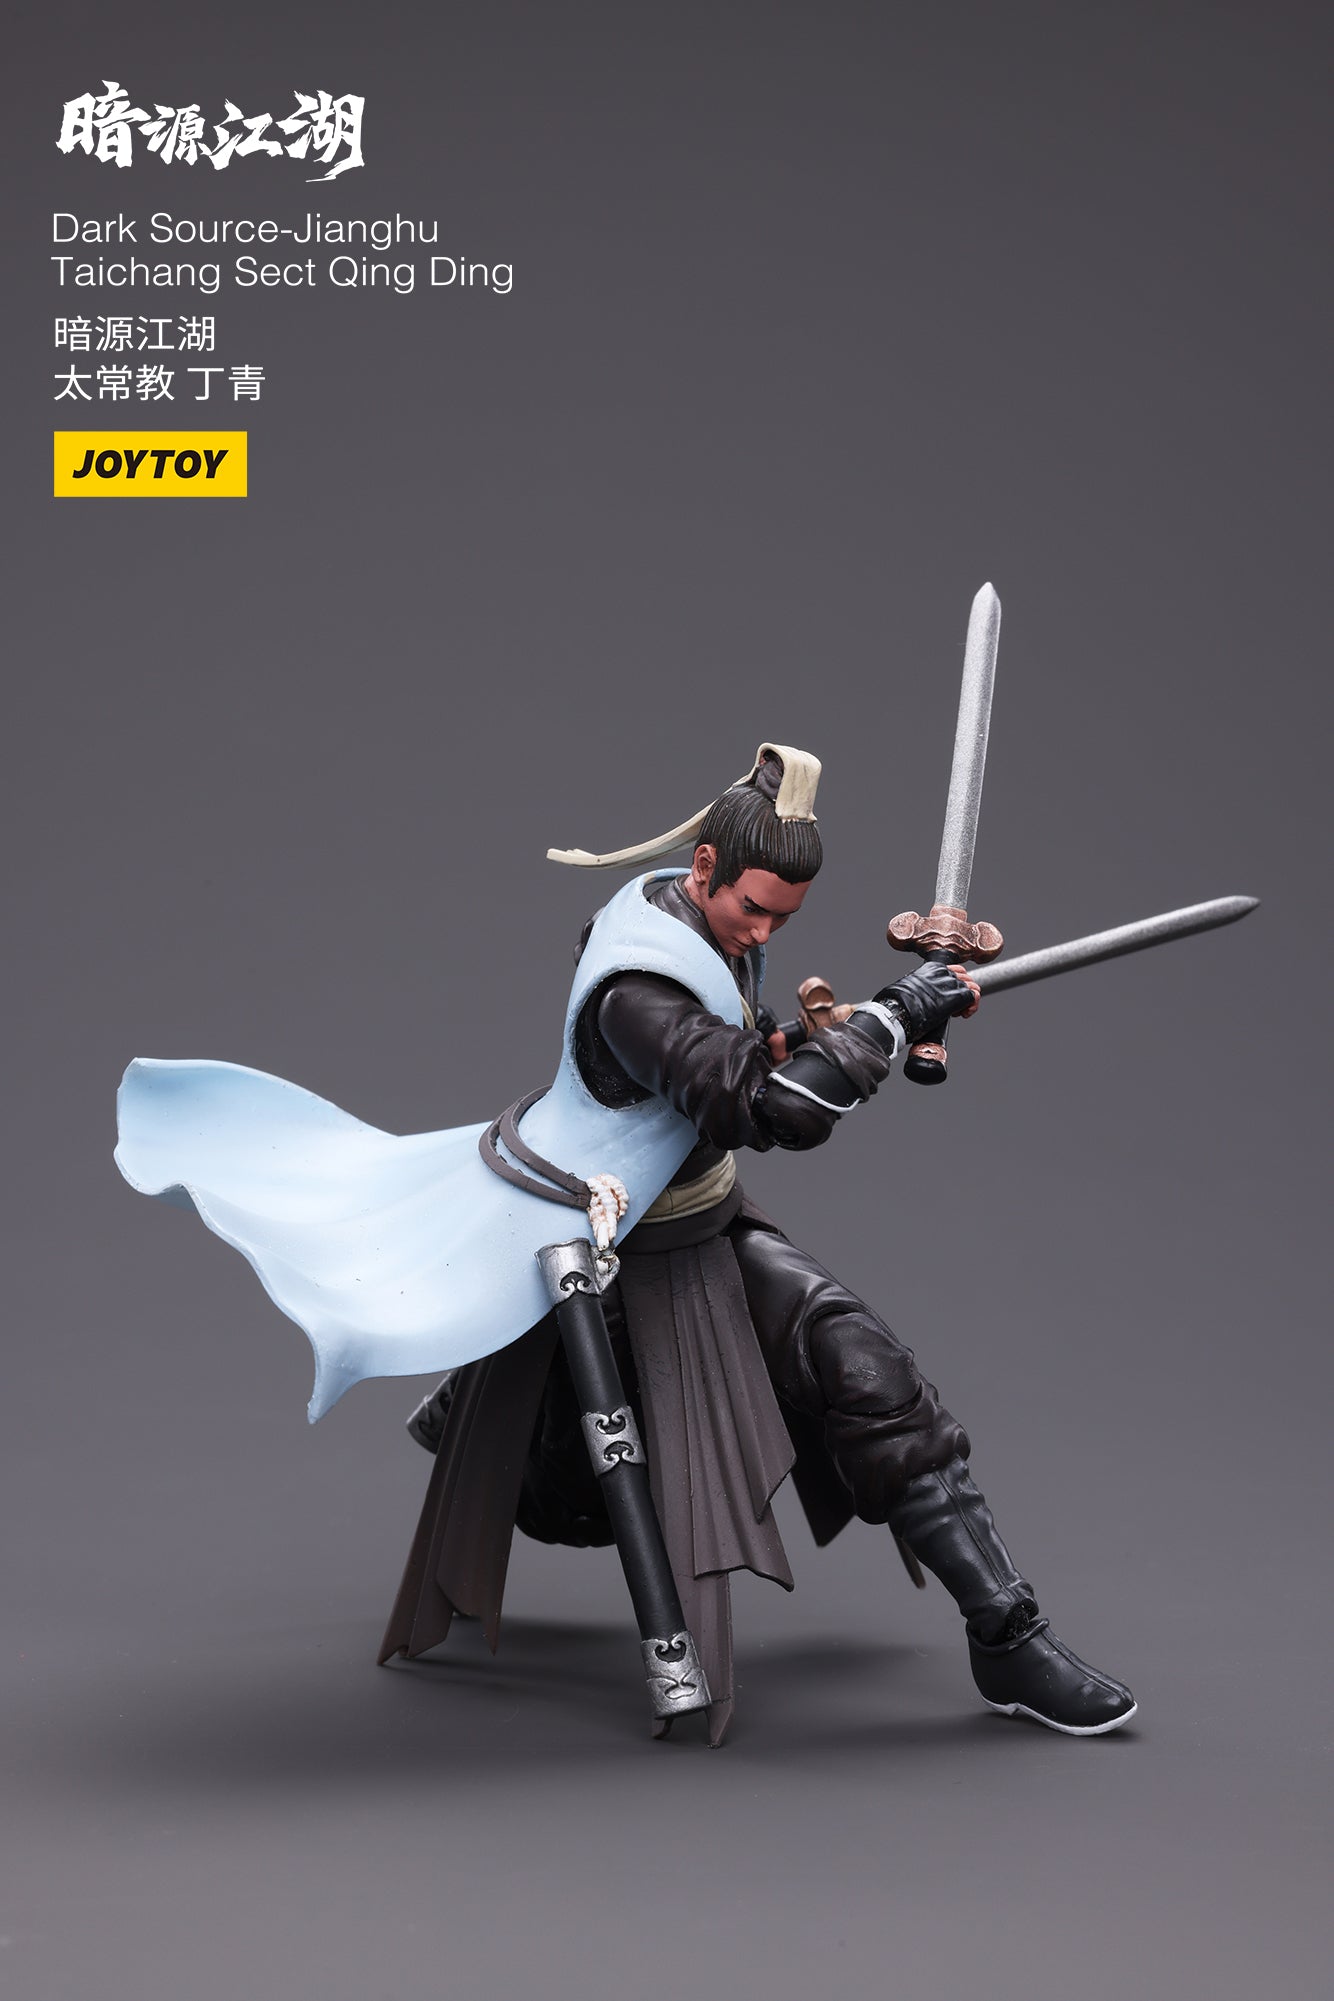 Joy Toy Dark Source JiangHu Taichang Sect Qing Ding figure is incredibly detailed in 1/18 scale. JoyToy, each figure is highly articulated and includes accessories. 